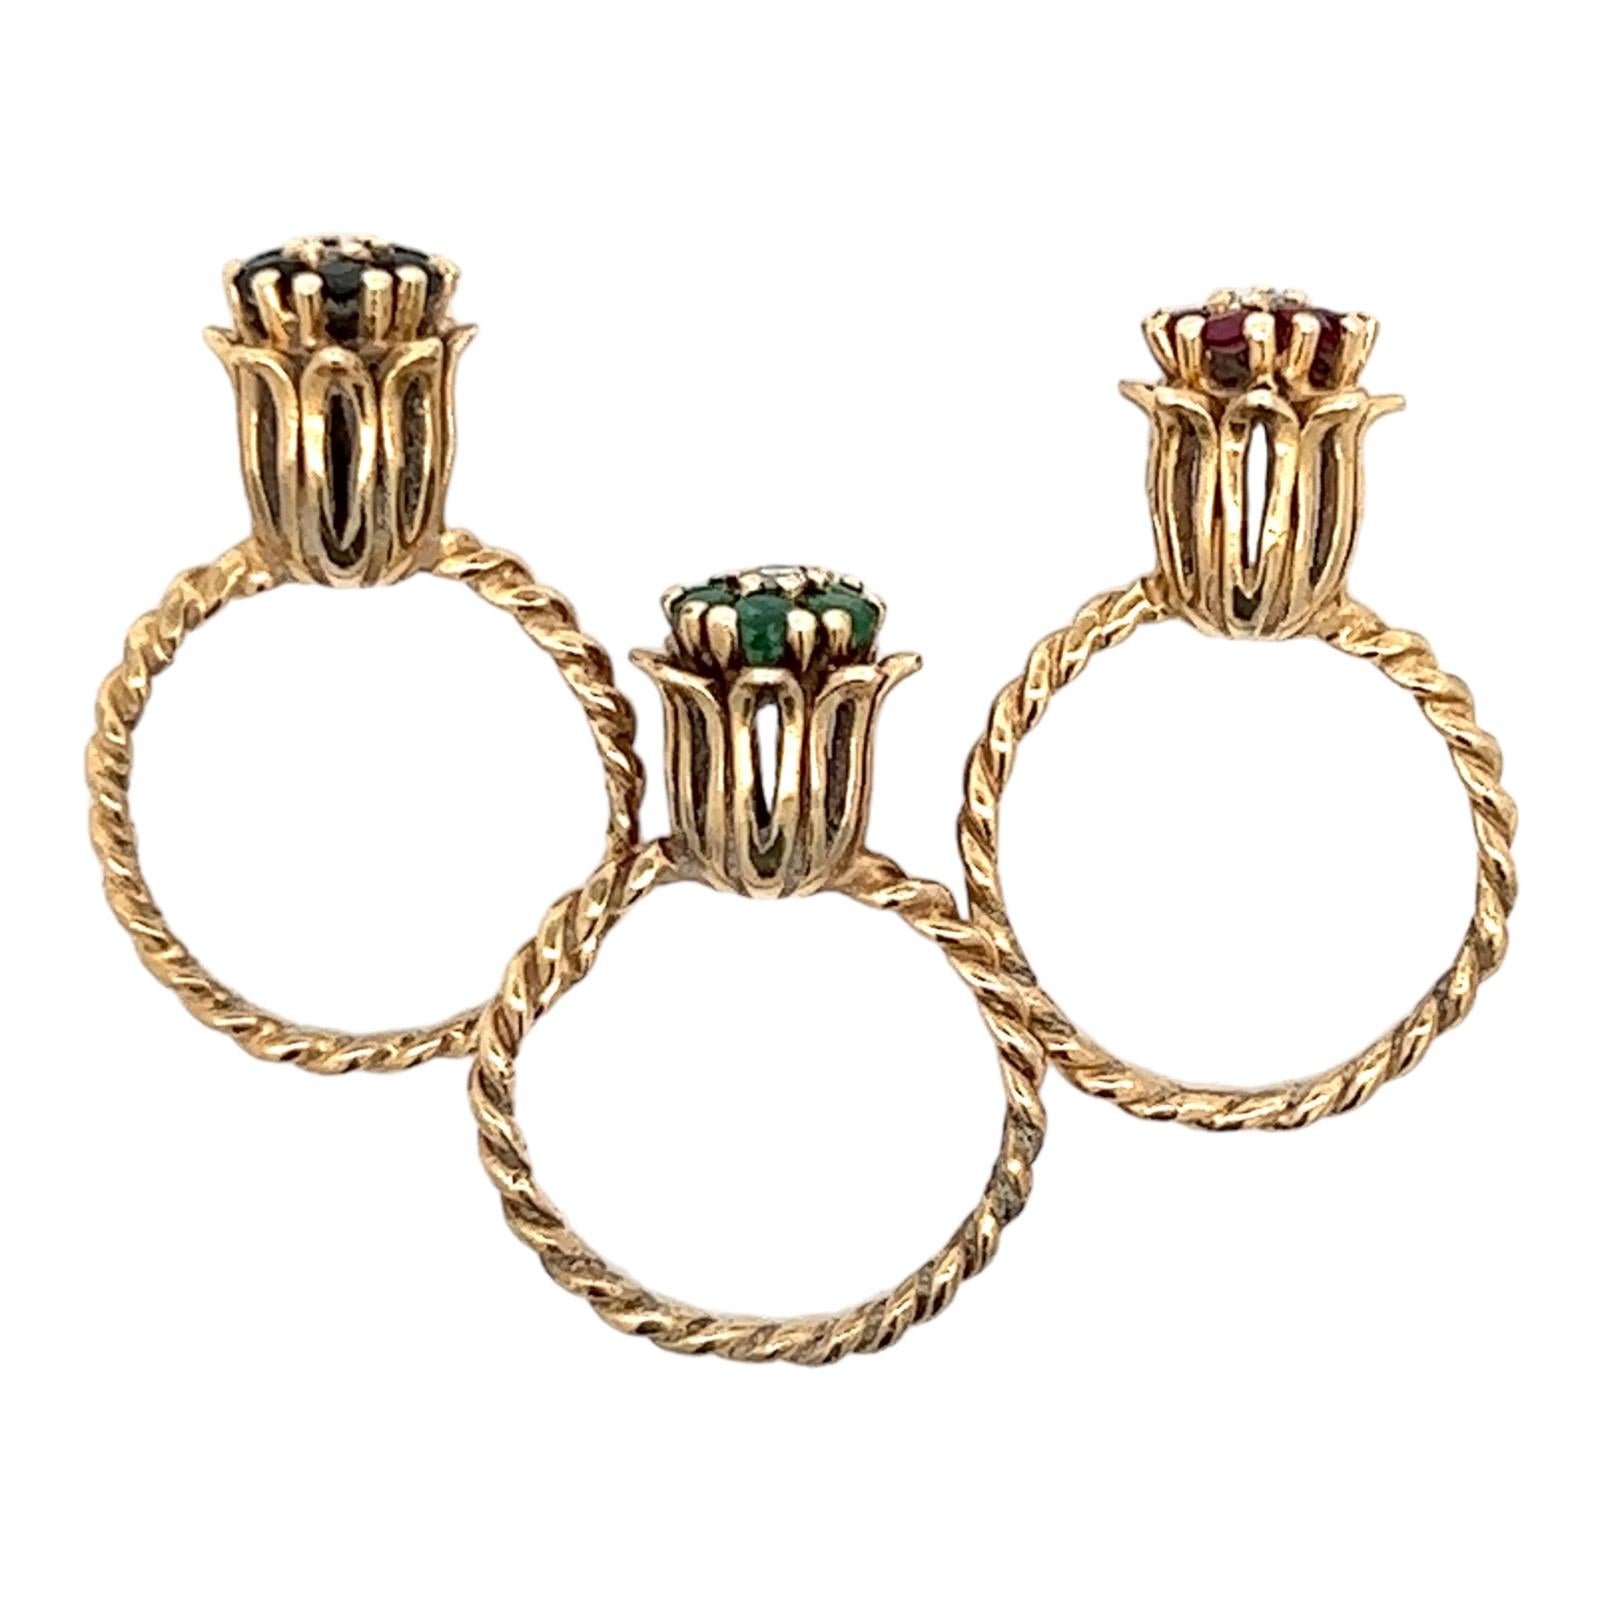 Set of three diamond, sapphire, emerald, and ruby tulip rings handcrafted in 14 karat yellow gold. The tulips feature a center round brilliant cut diamond and either ruby, emerald, or sapphire gemstones. The 3 diamonds weigh approximately .21 CTW.